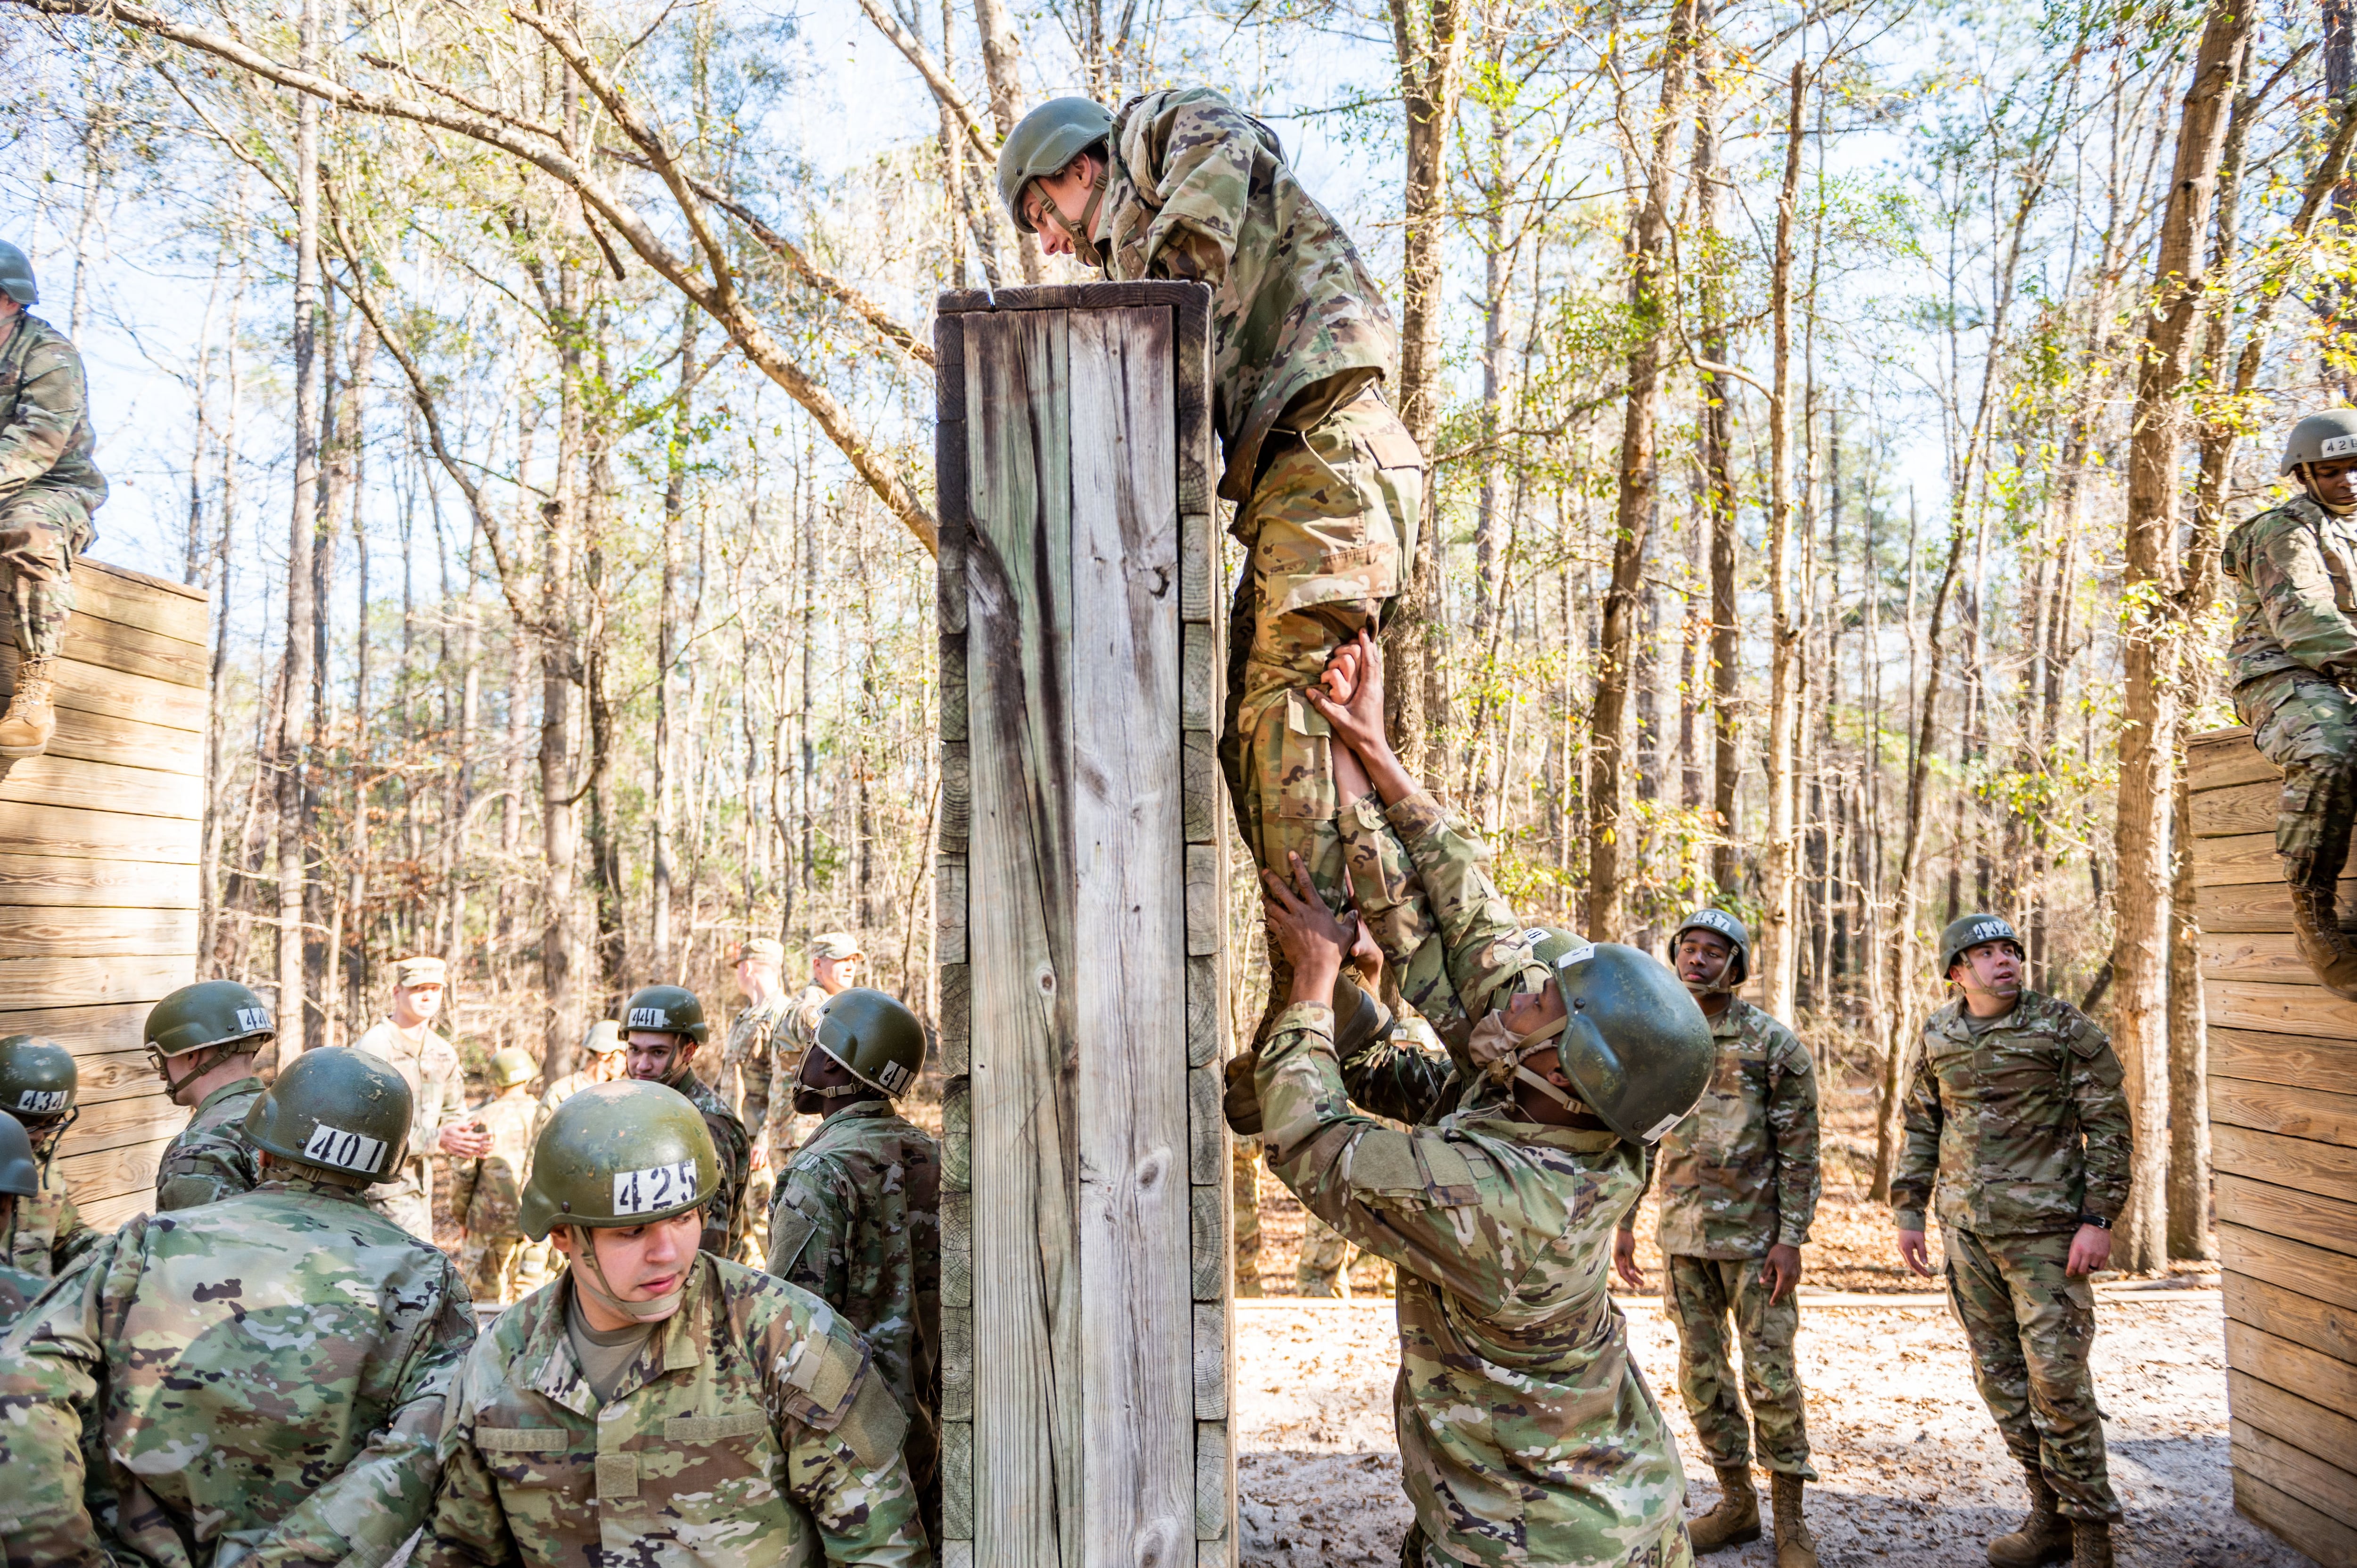 Trainees at Fort Benning, Georgia, complete the Sand Hill Obstacle Course Jan, 27, 2022. (Patrick A. Albright/Army)